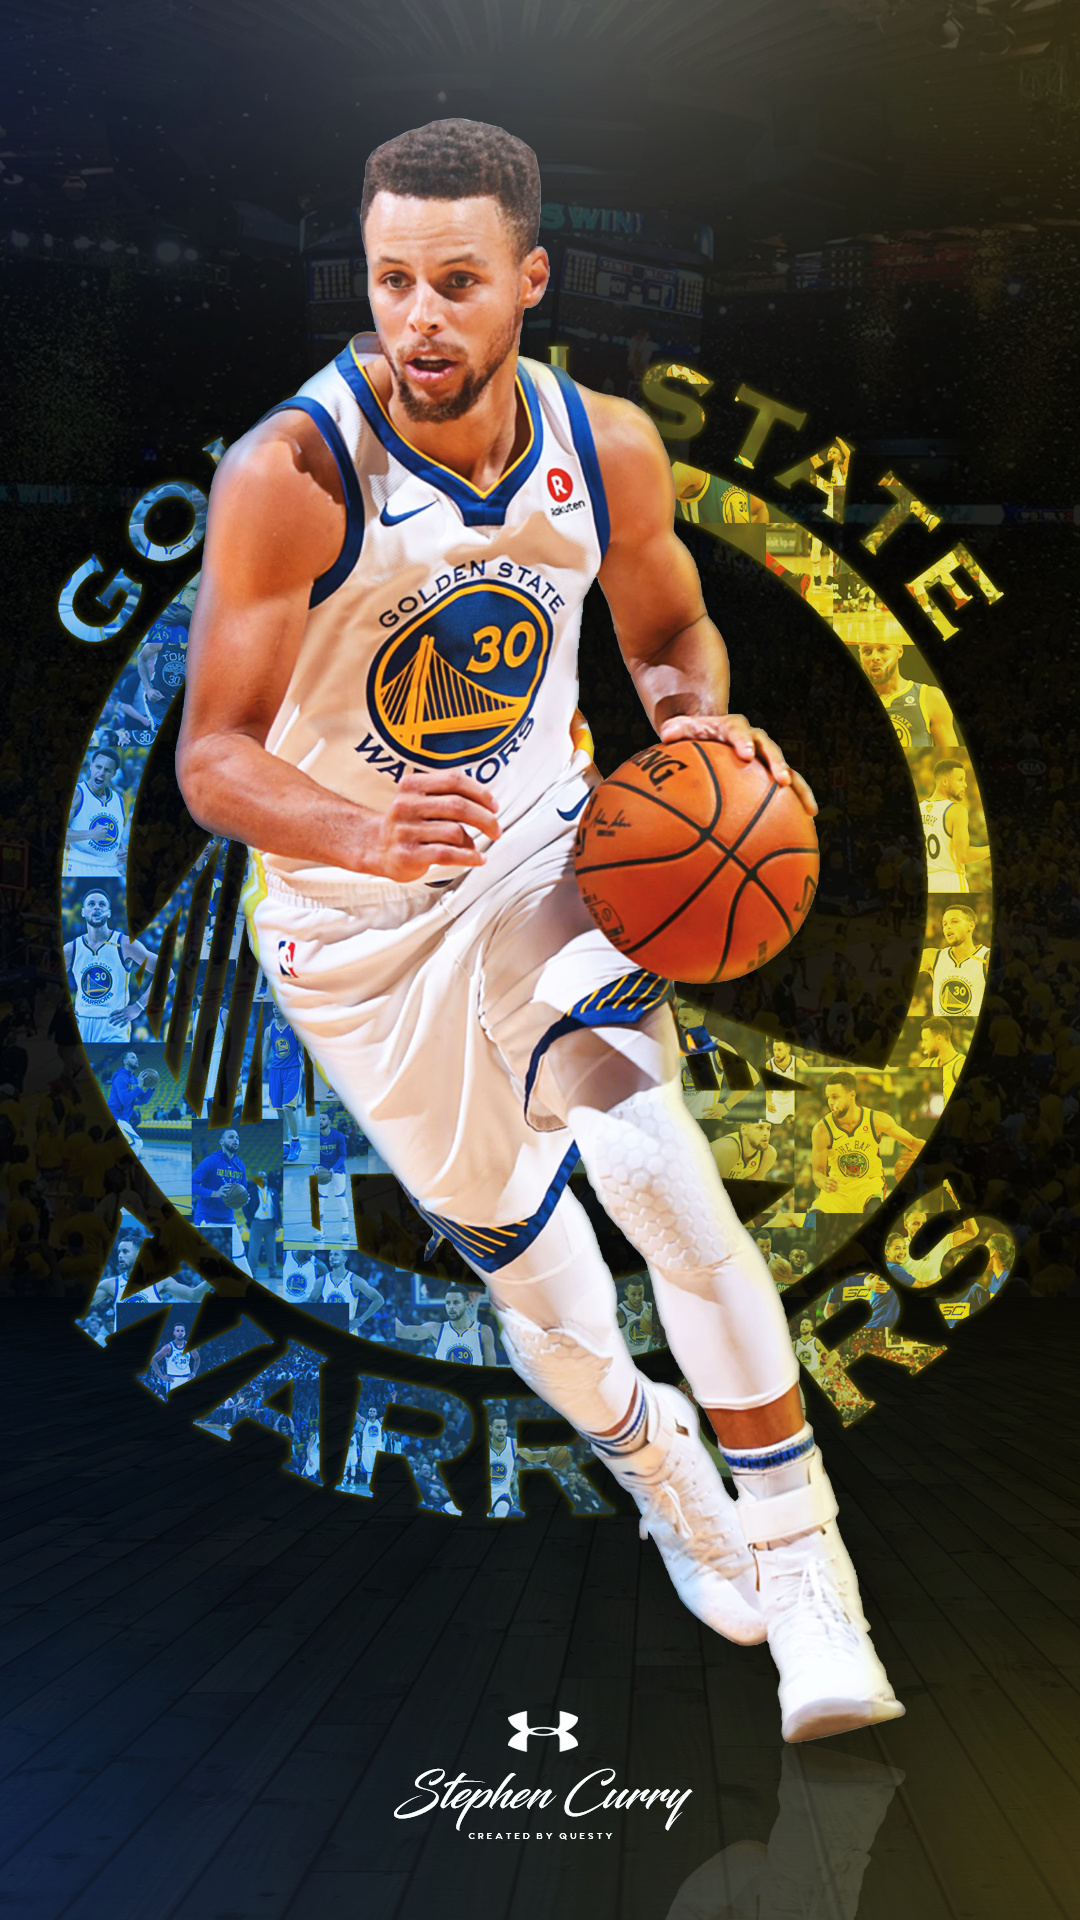 Golden State Warriors: Steph Curry, The team was founded in 1946 and was originally based in Philadelphia. 1080x1920 Full HD Wallpaper.